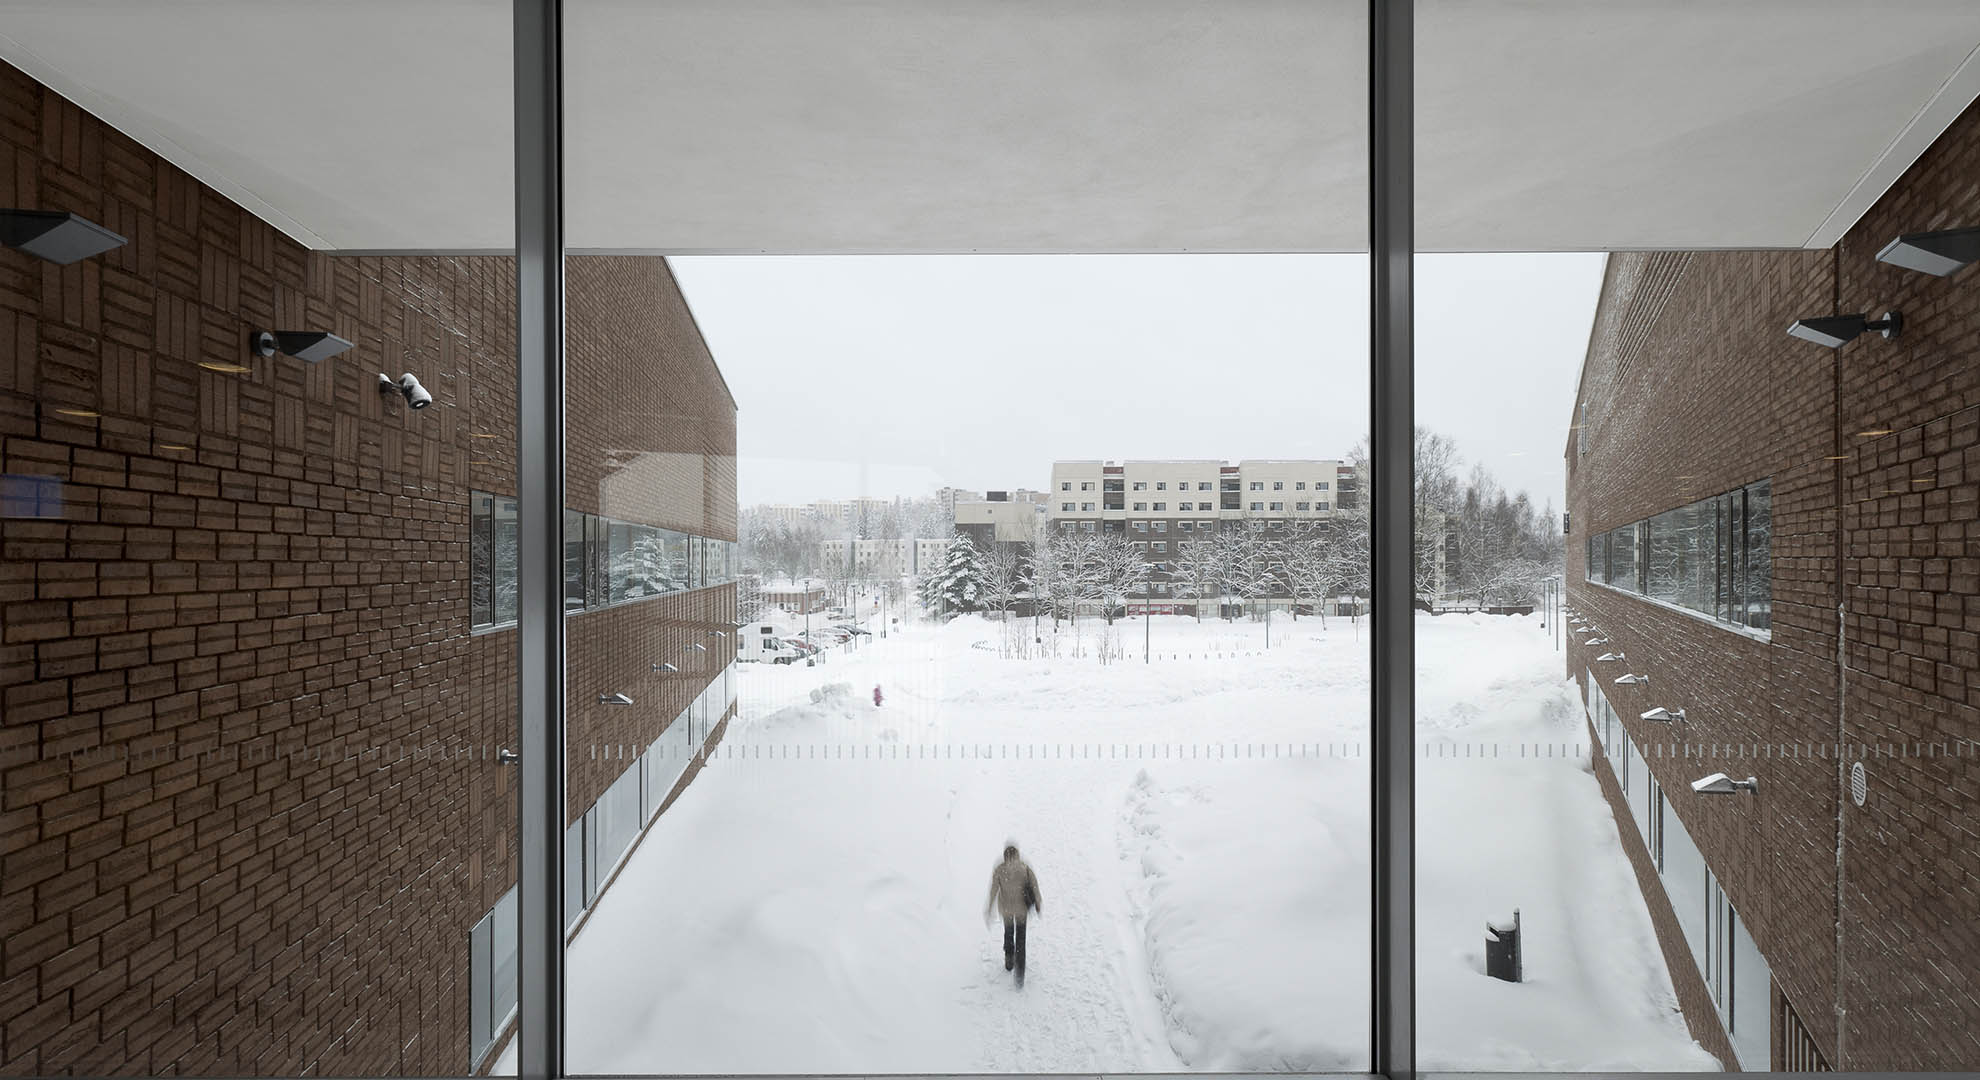 VIEW FROM THE KIRKKOJÄRVI SCHOOL TOWARDS THE HOUSING BLOCKS SEPARATED BY WOODS AND PARKING LOTS, ESPOO, 2010, VERSTAS ARCHITECTS. PHOTO © TUOMAS UUSHEIMO